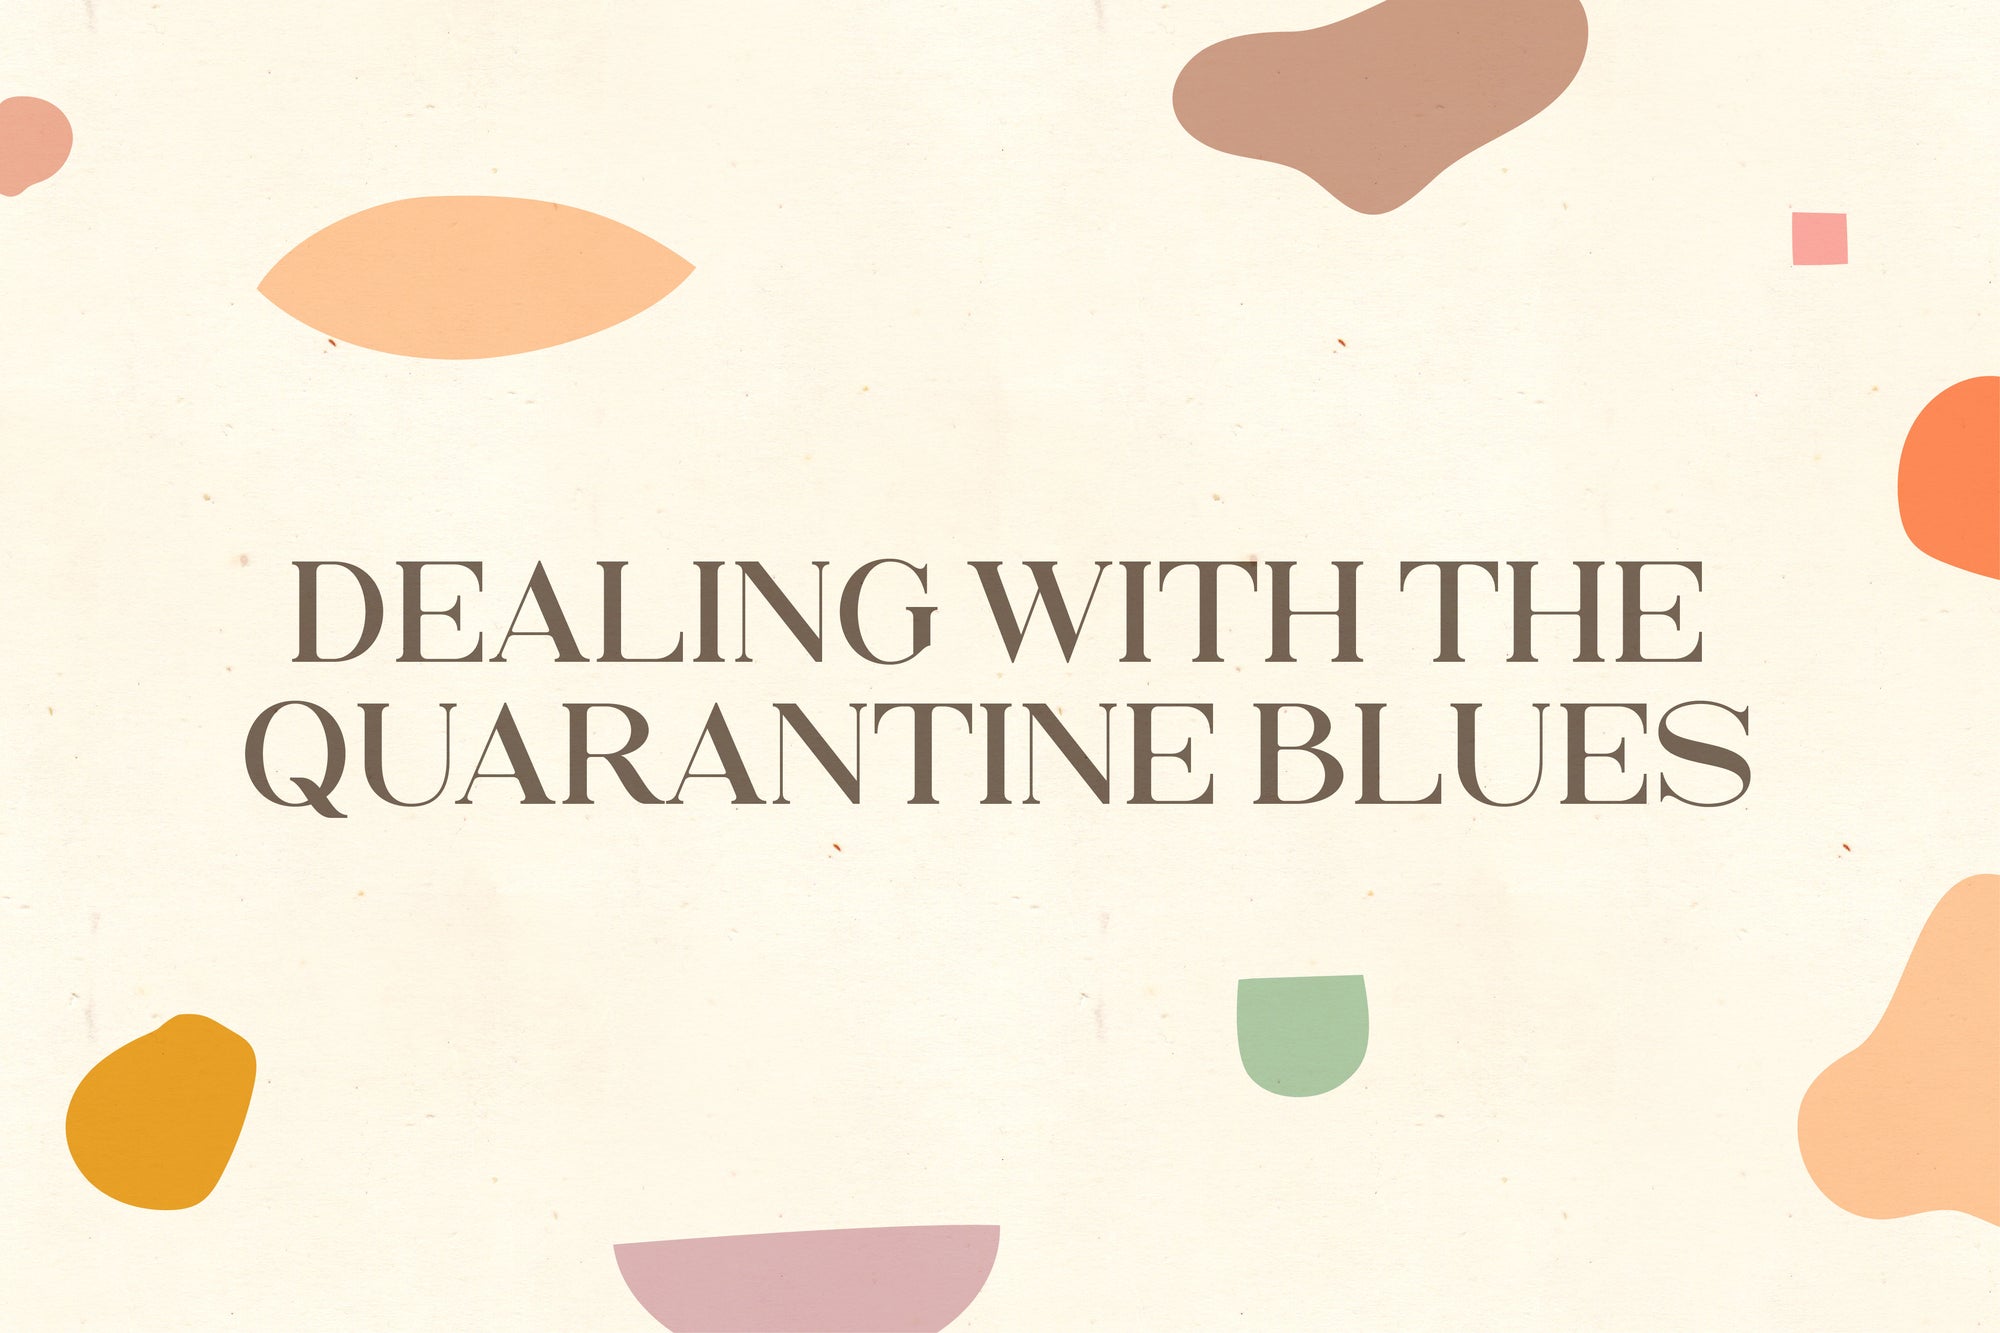 Dealing with the quarantine blues